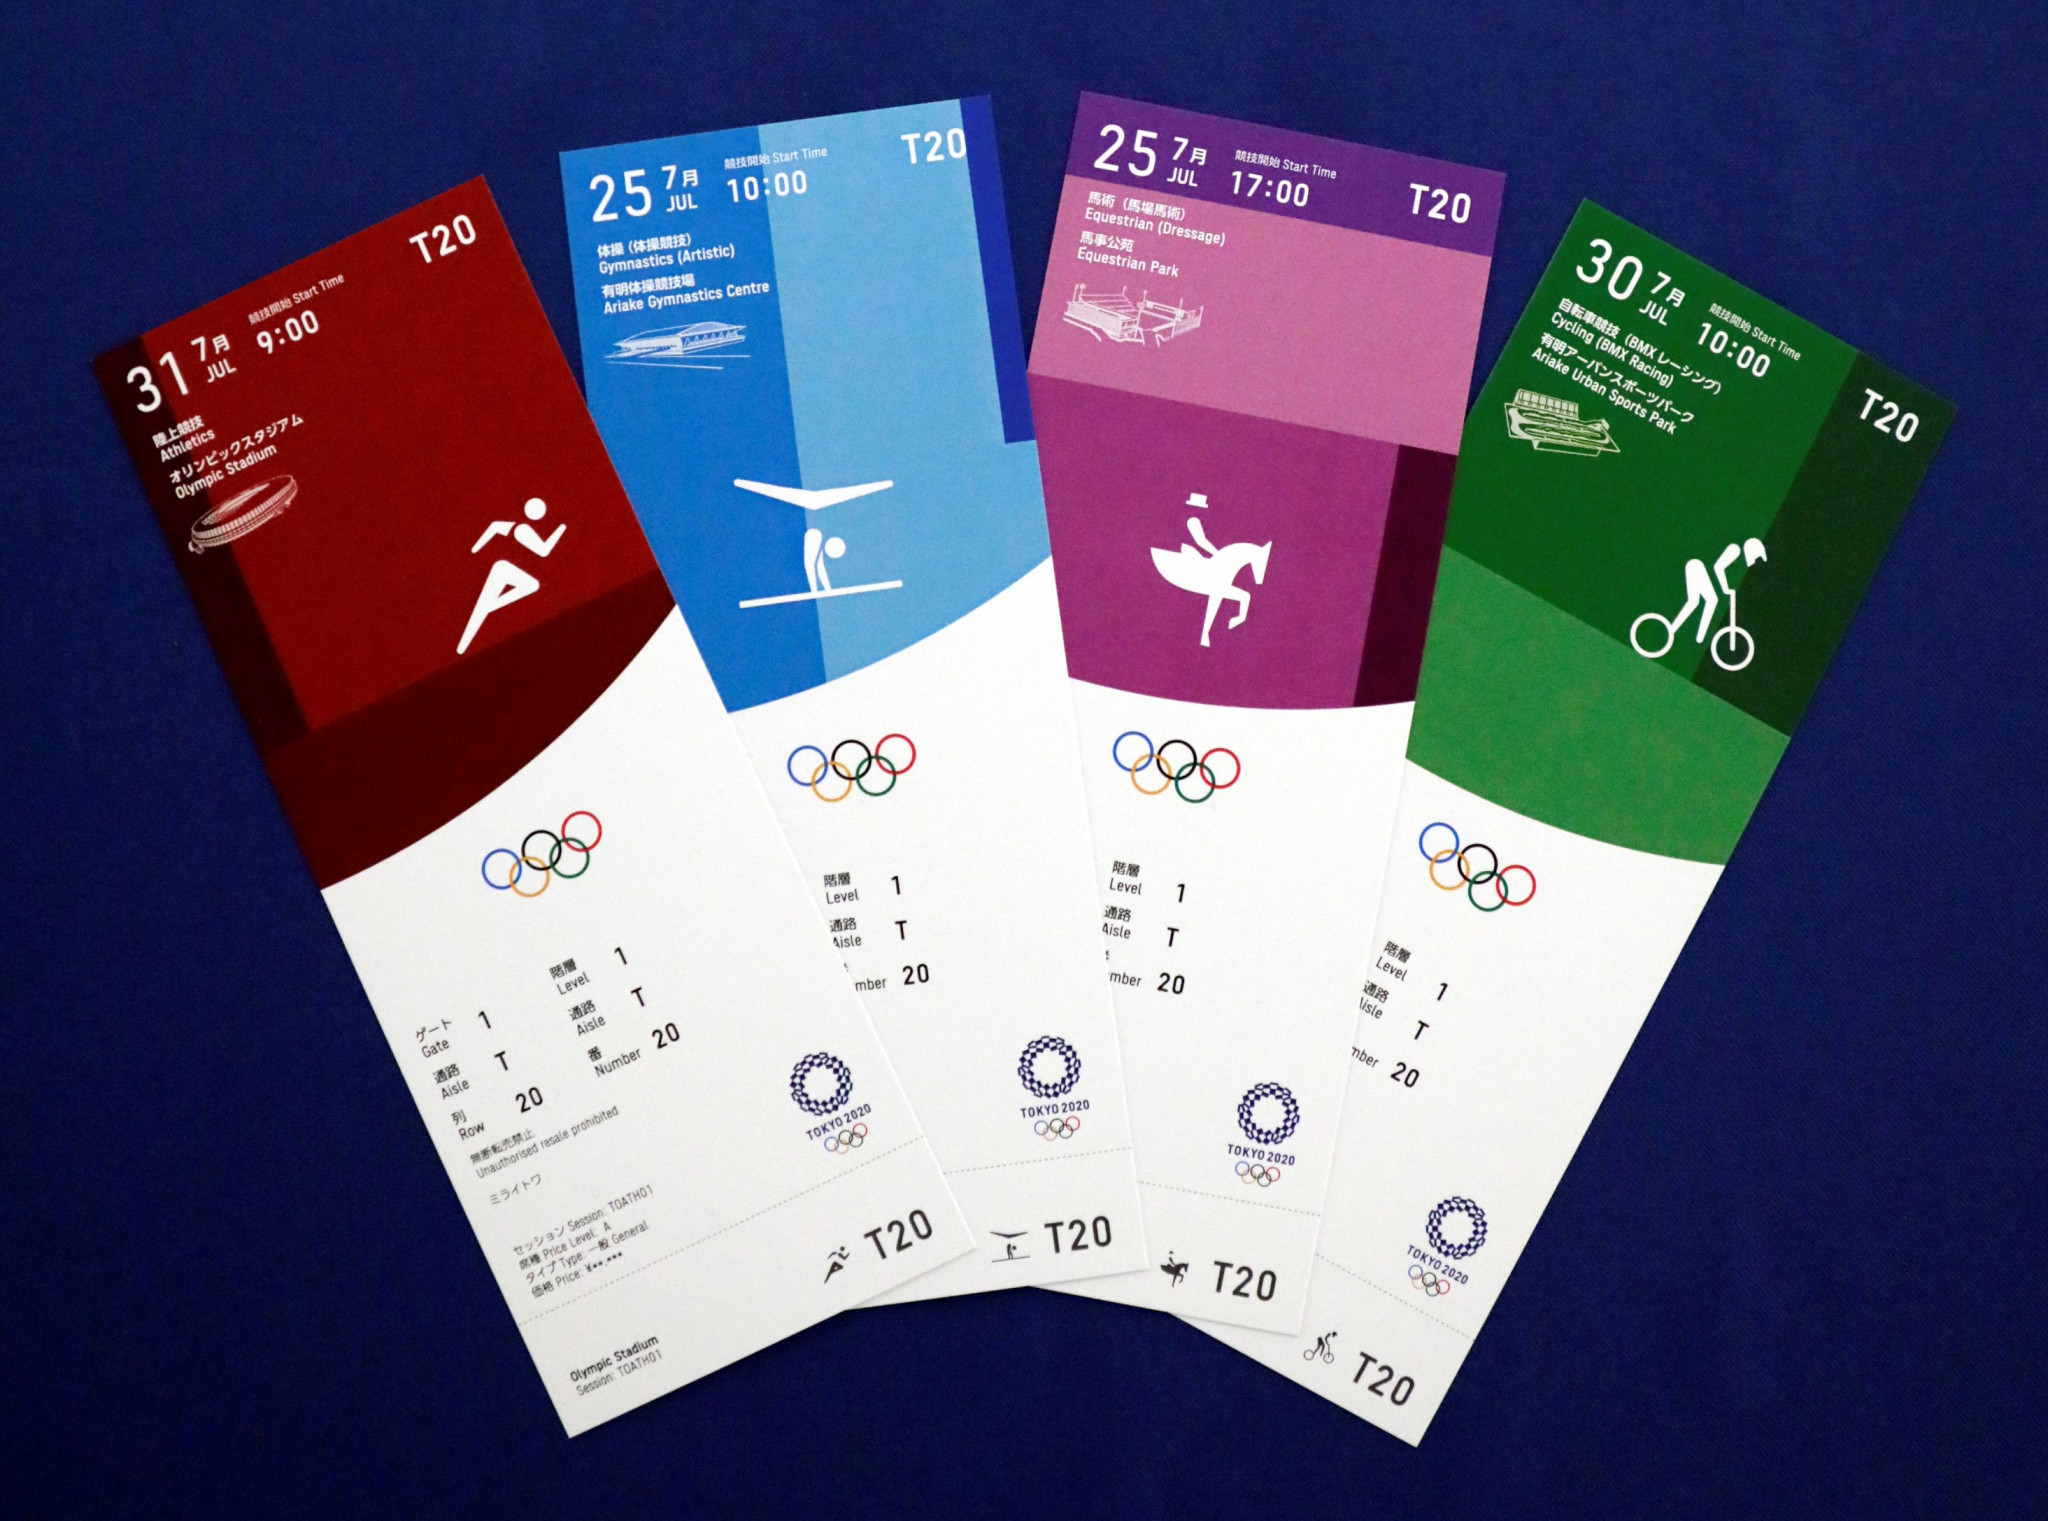 Postcard lottery for Tokyo 2020 tickets opens in Japan